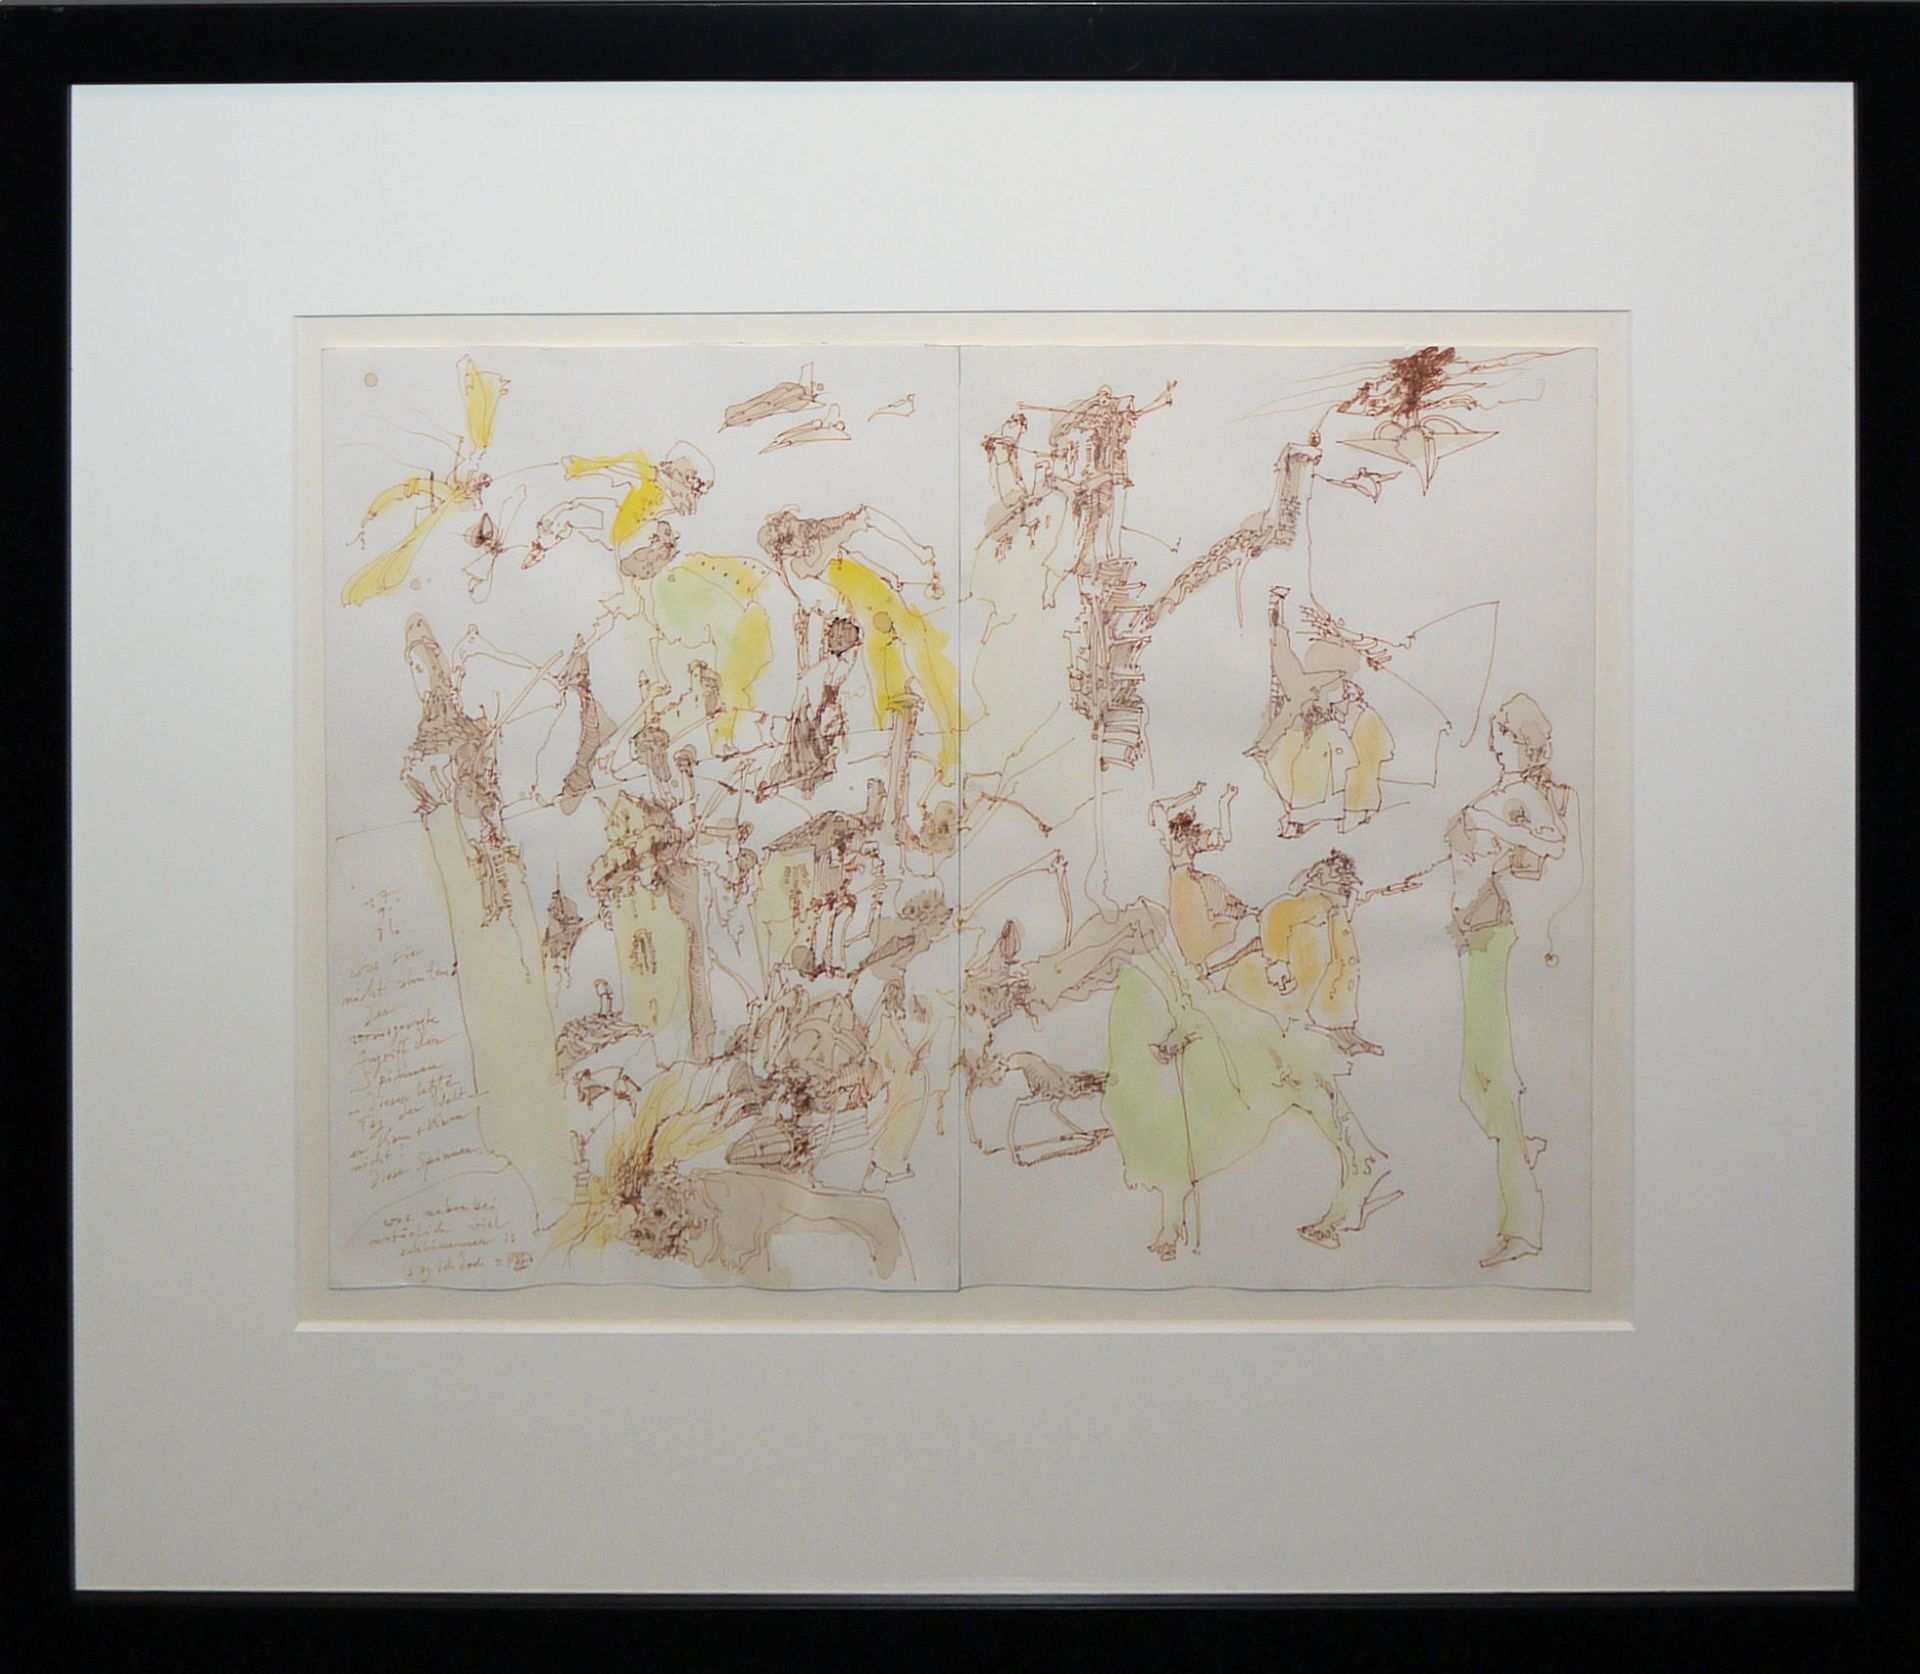 Horst Janssen, Untitled, watercolour with pen and ink drawing from 1986, signed, framed